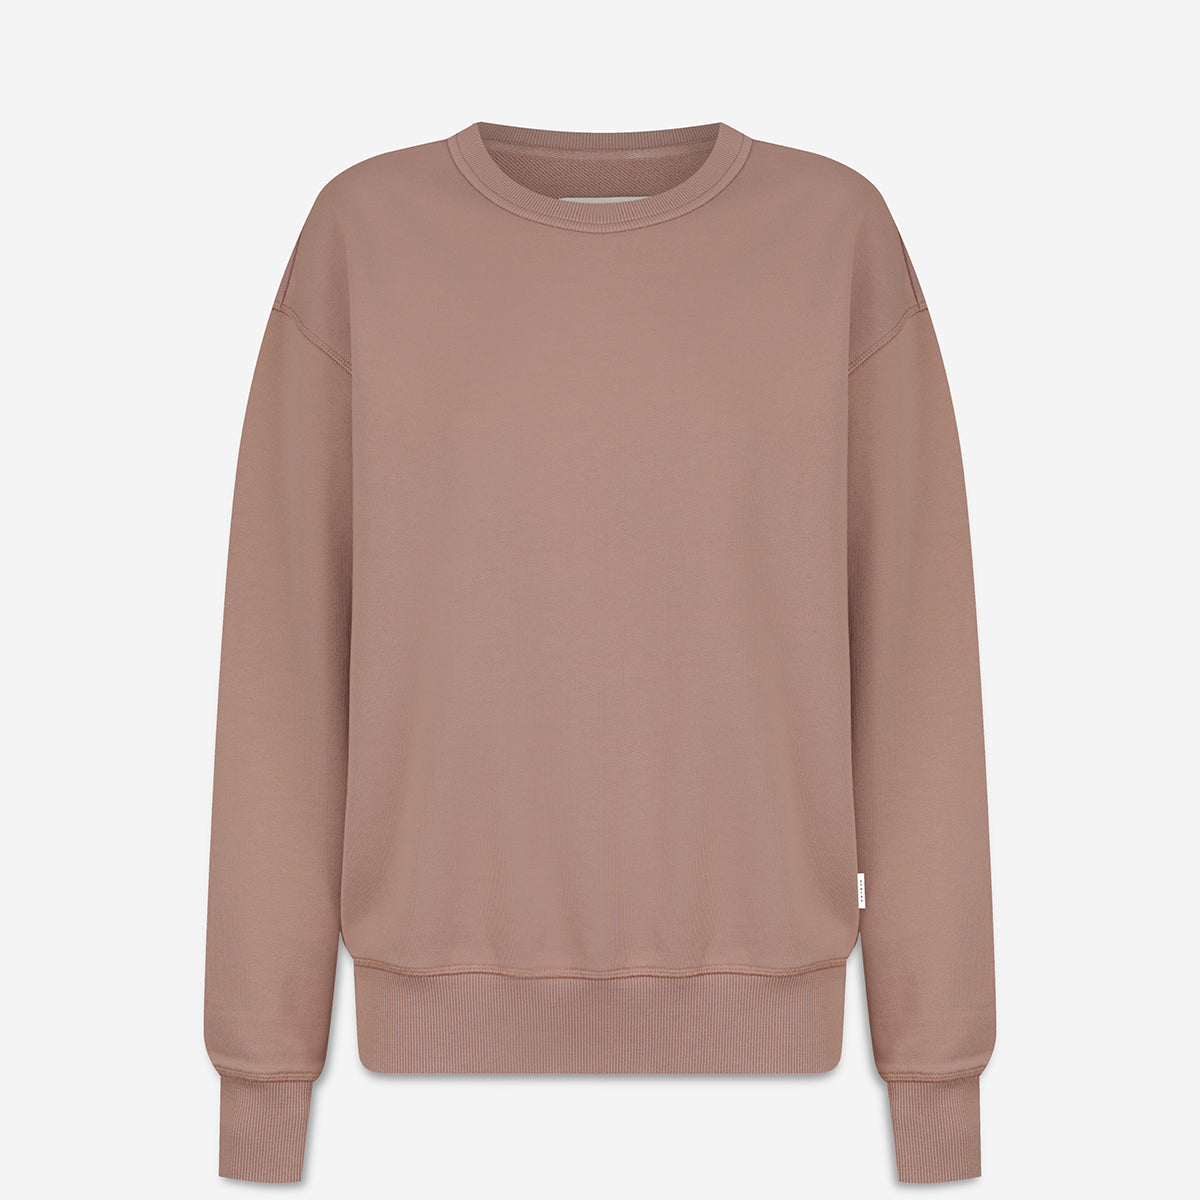 Could Be Nice Classic Crew - Dusty Rose